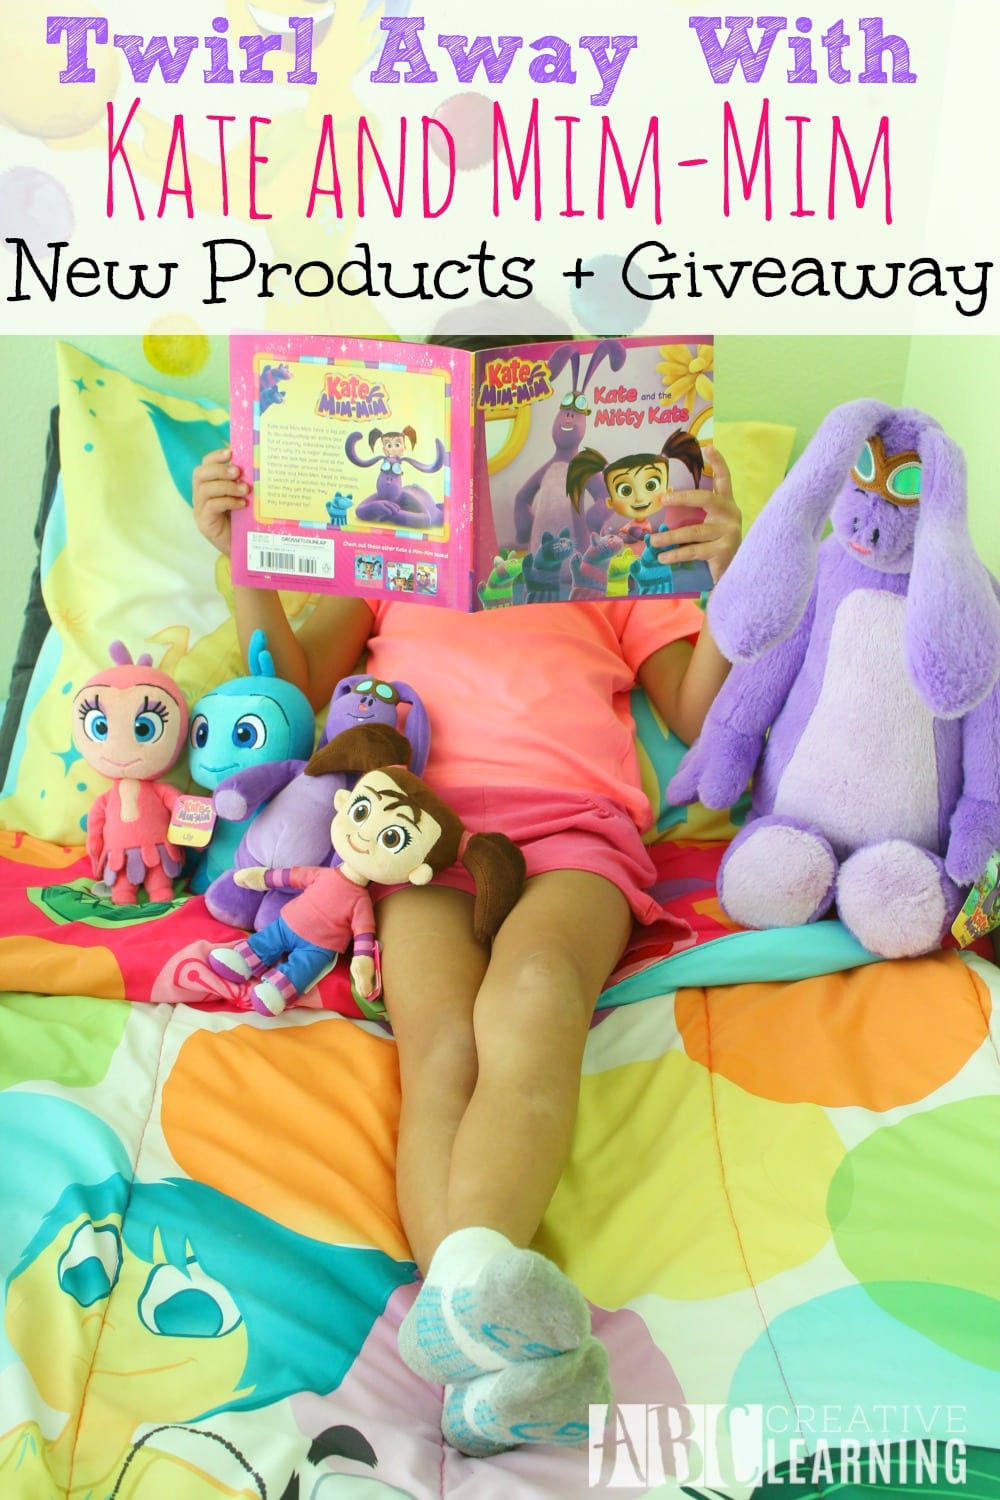 Twirl Away With Kate And Mim-Mim New Products + Giveaway